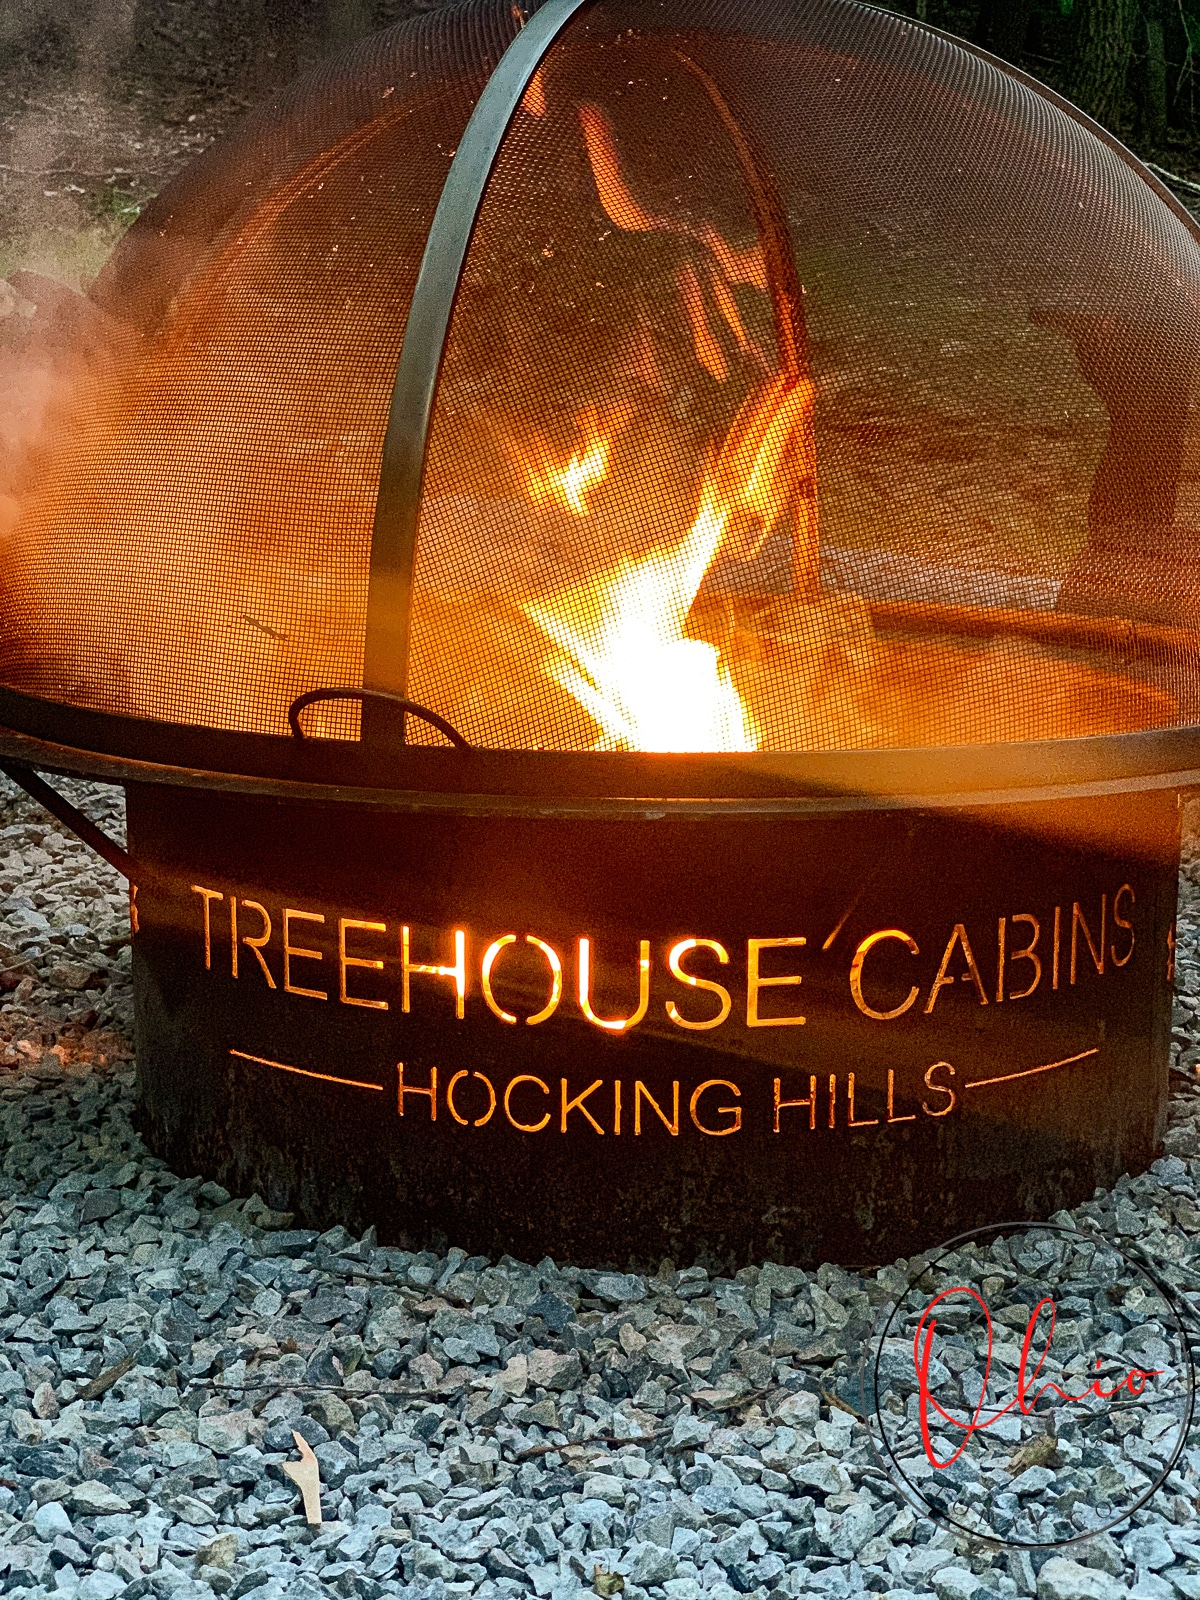 rustic fire pit with cut out words: treehouse cabins and roaring flames in it